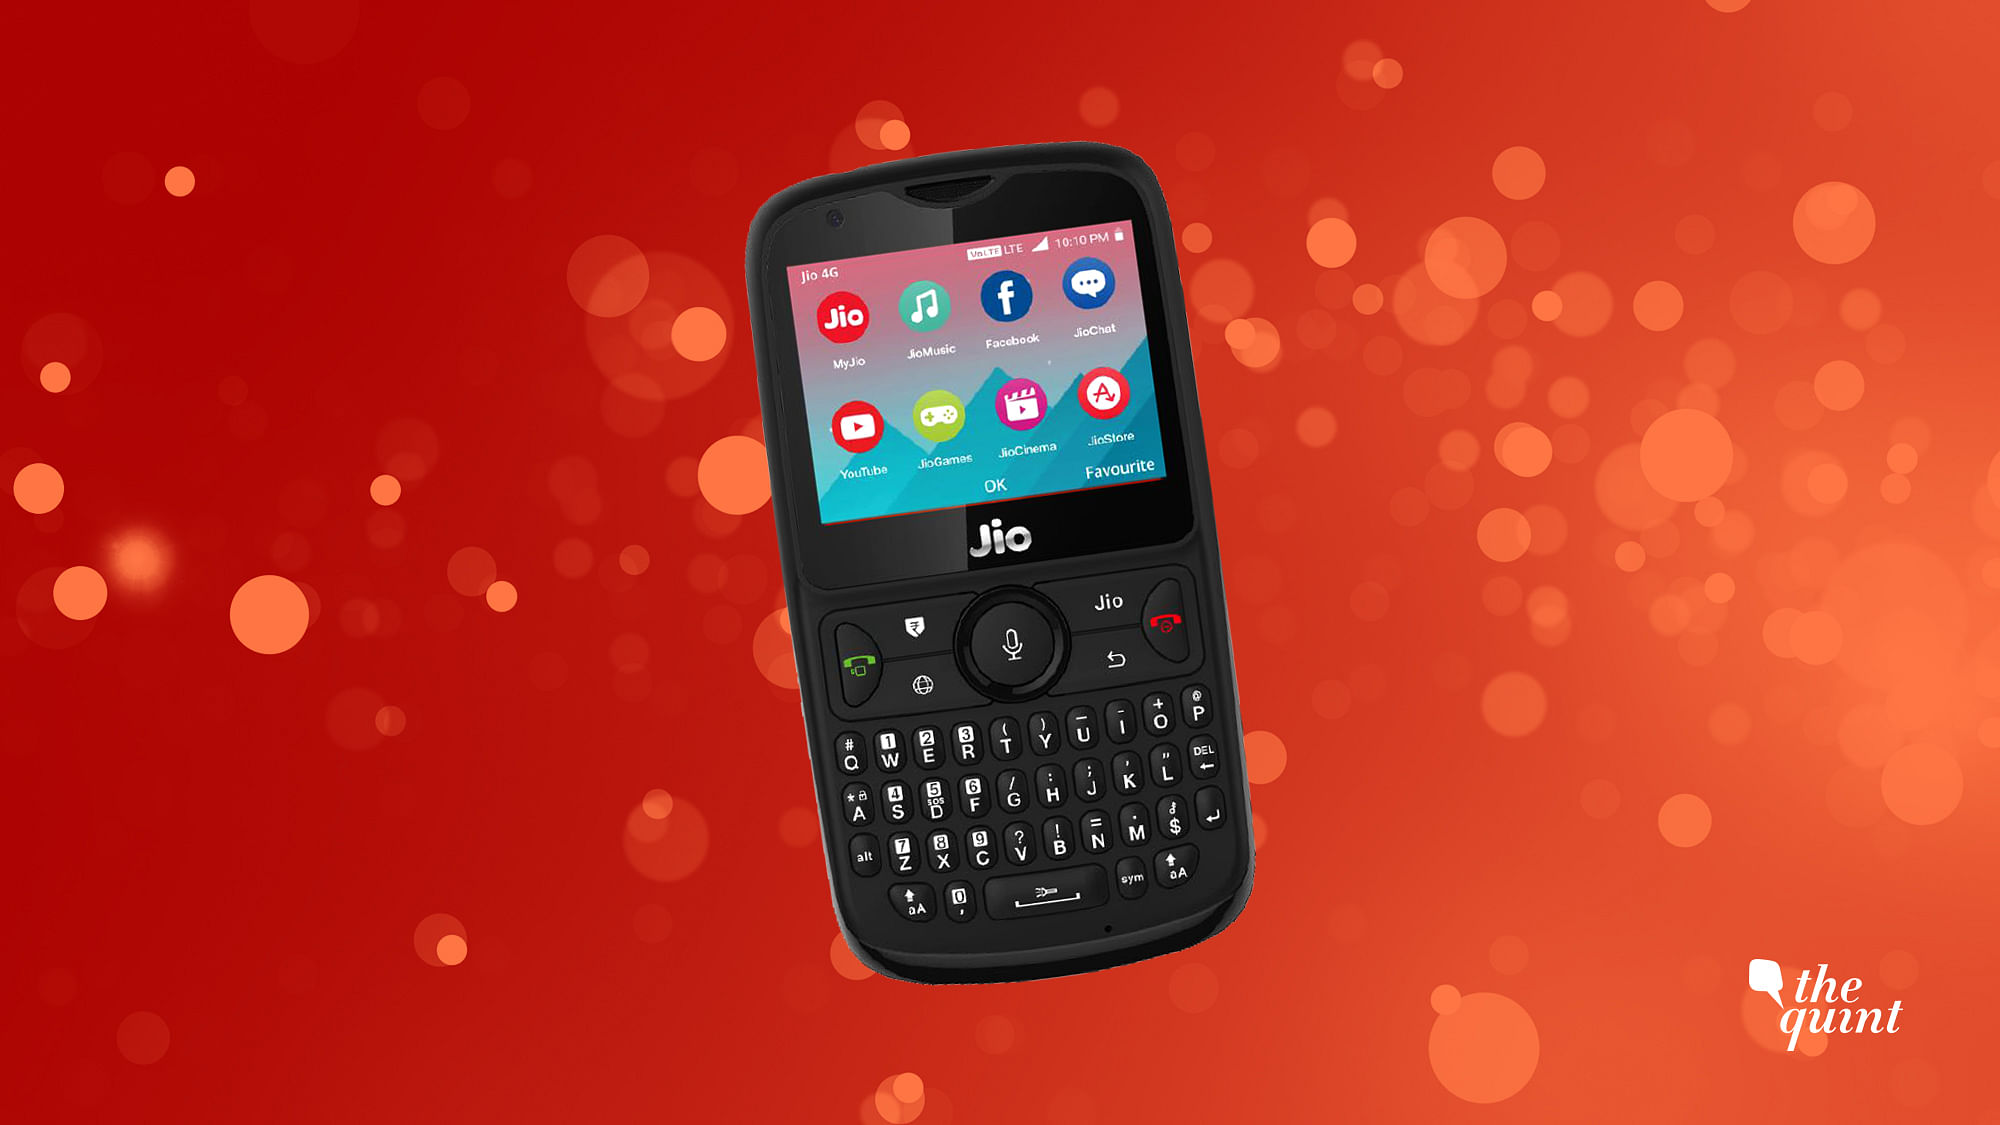  Kai OS powered newly announced JioPhone 2 will also supports WhatsApp